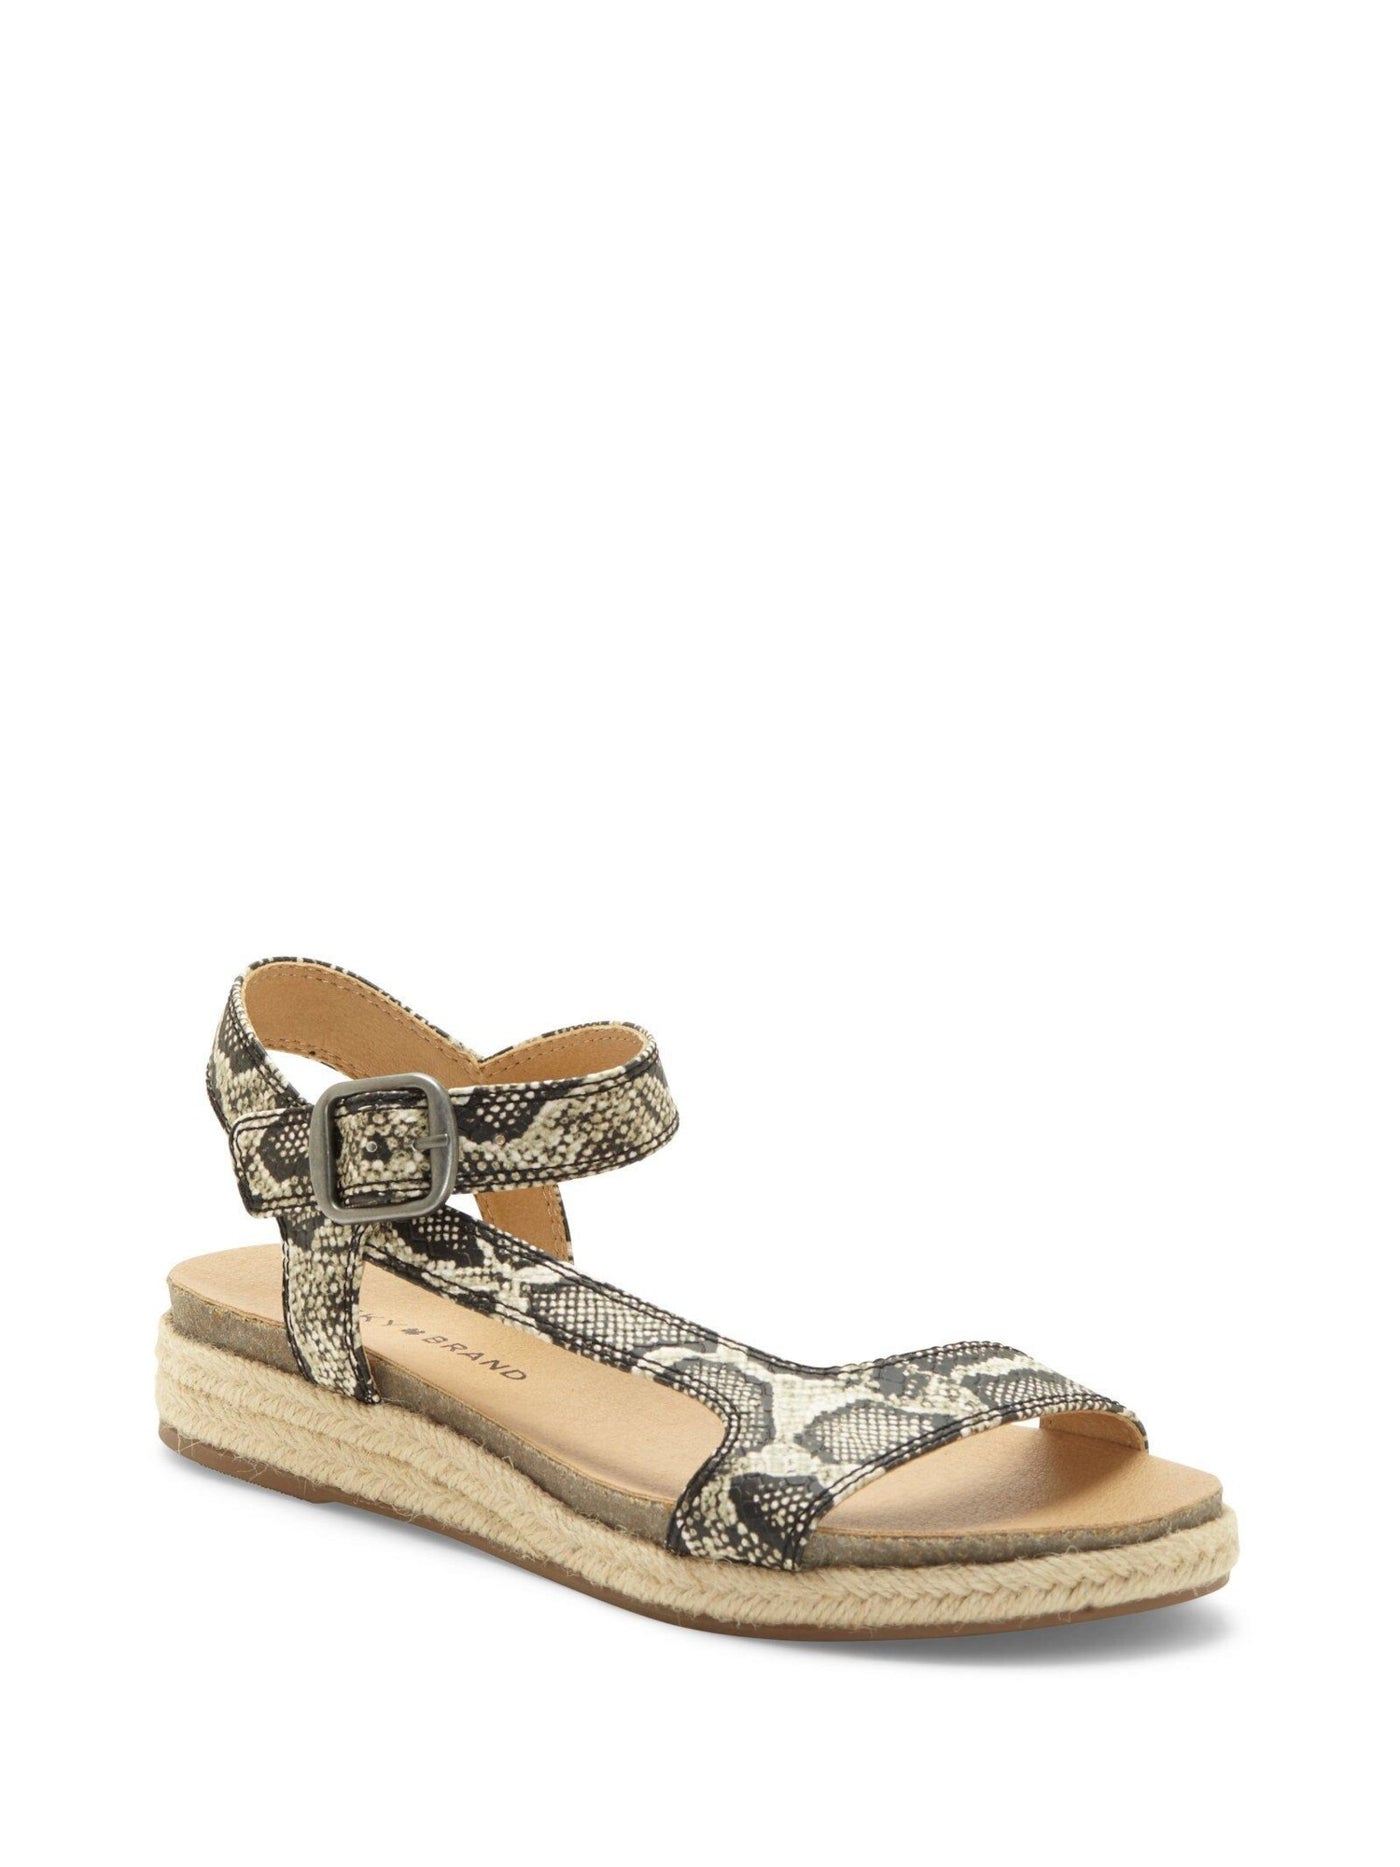 LUCKY BRAND Womens Beige Snake Print Espadrille Ankle Strap T-Strap Buckle Accent Gabrien Round Toe Wedge Buckle Slingback Sandal 8 M